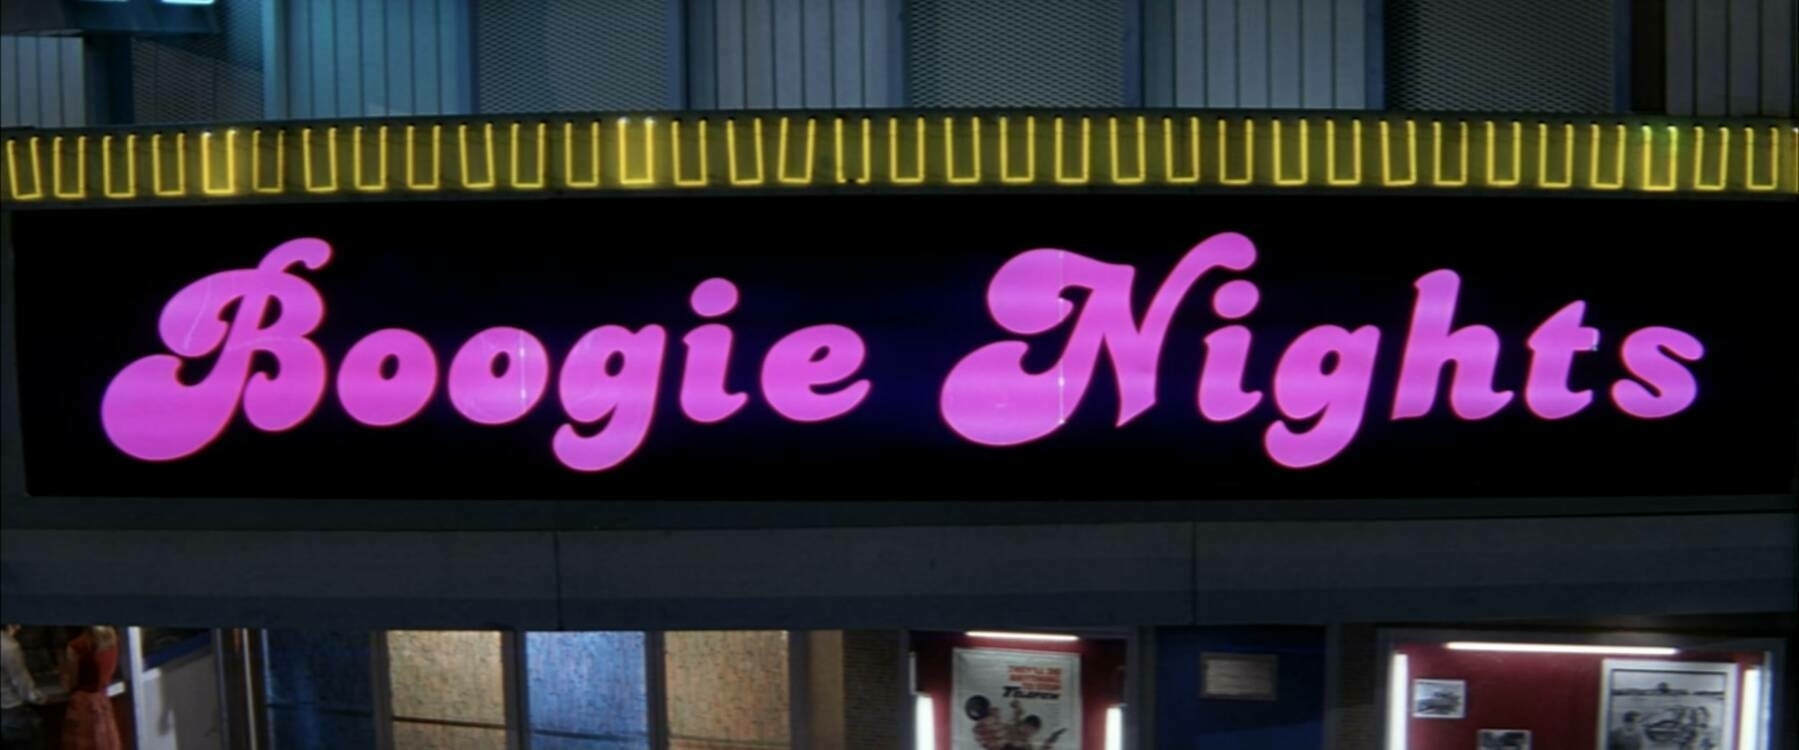 The title card for the film, Boogie Nights.